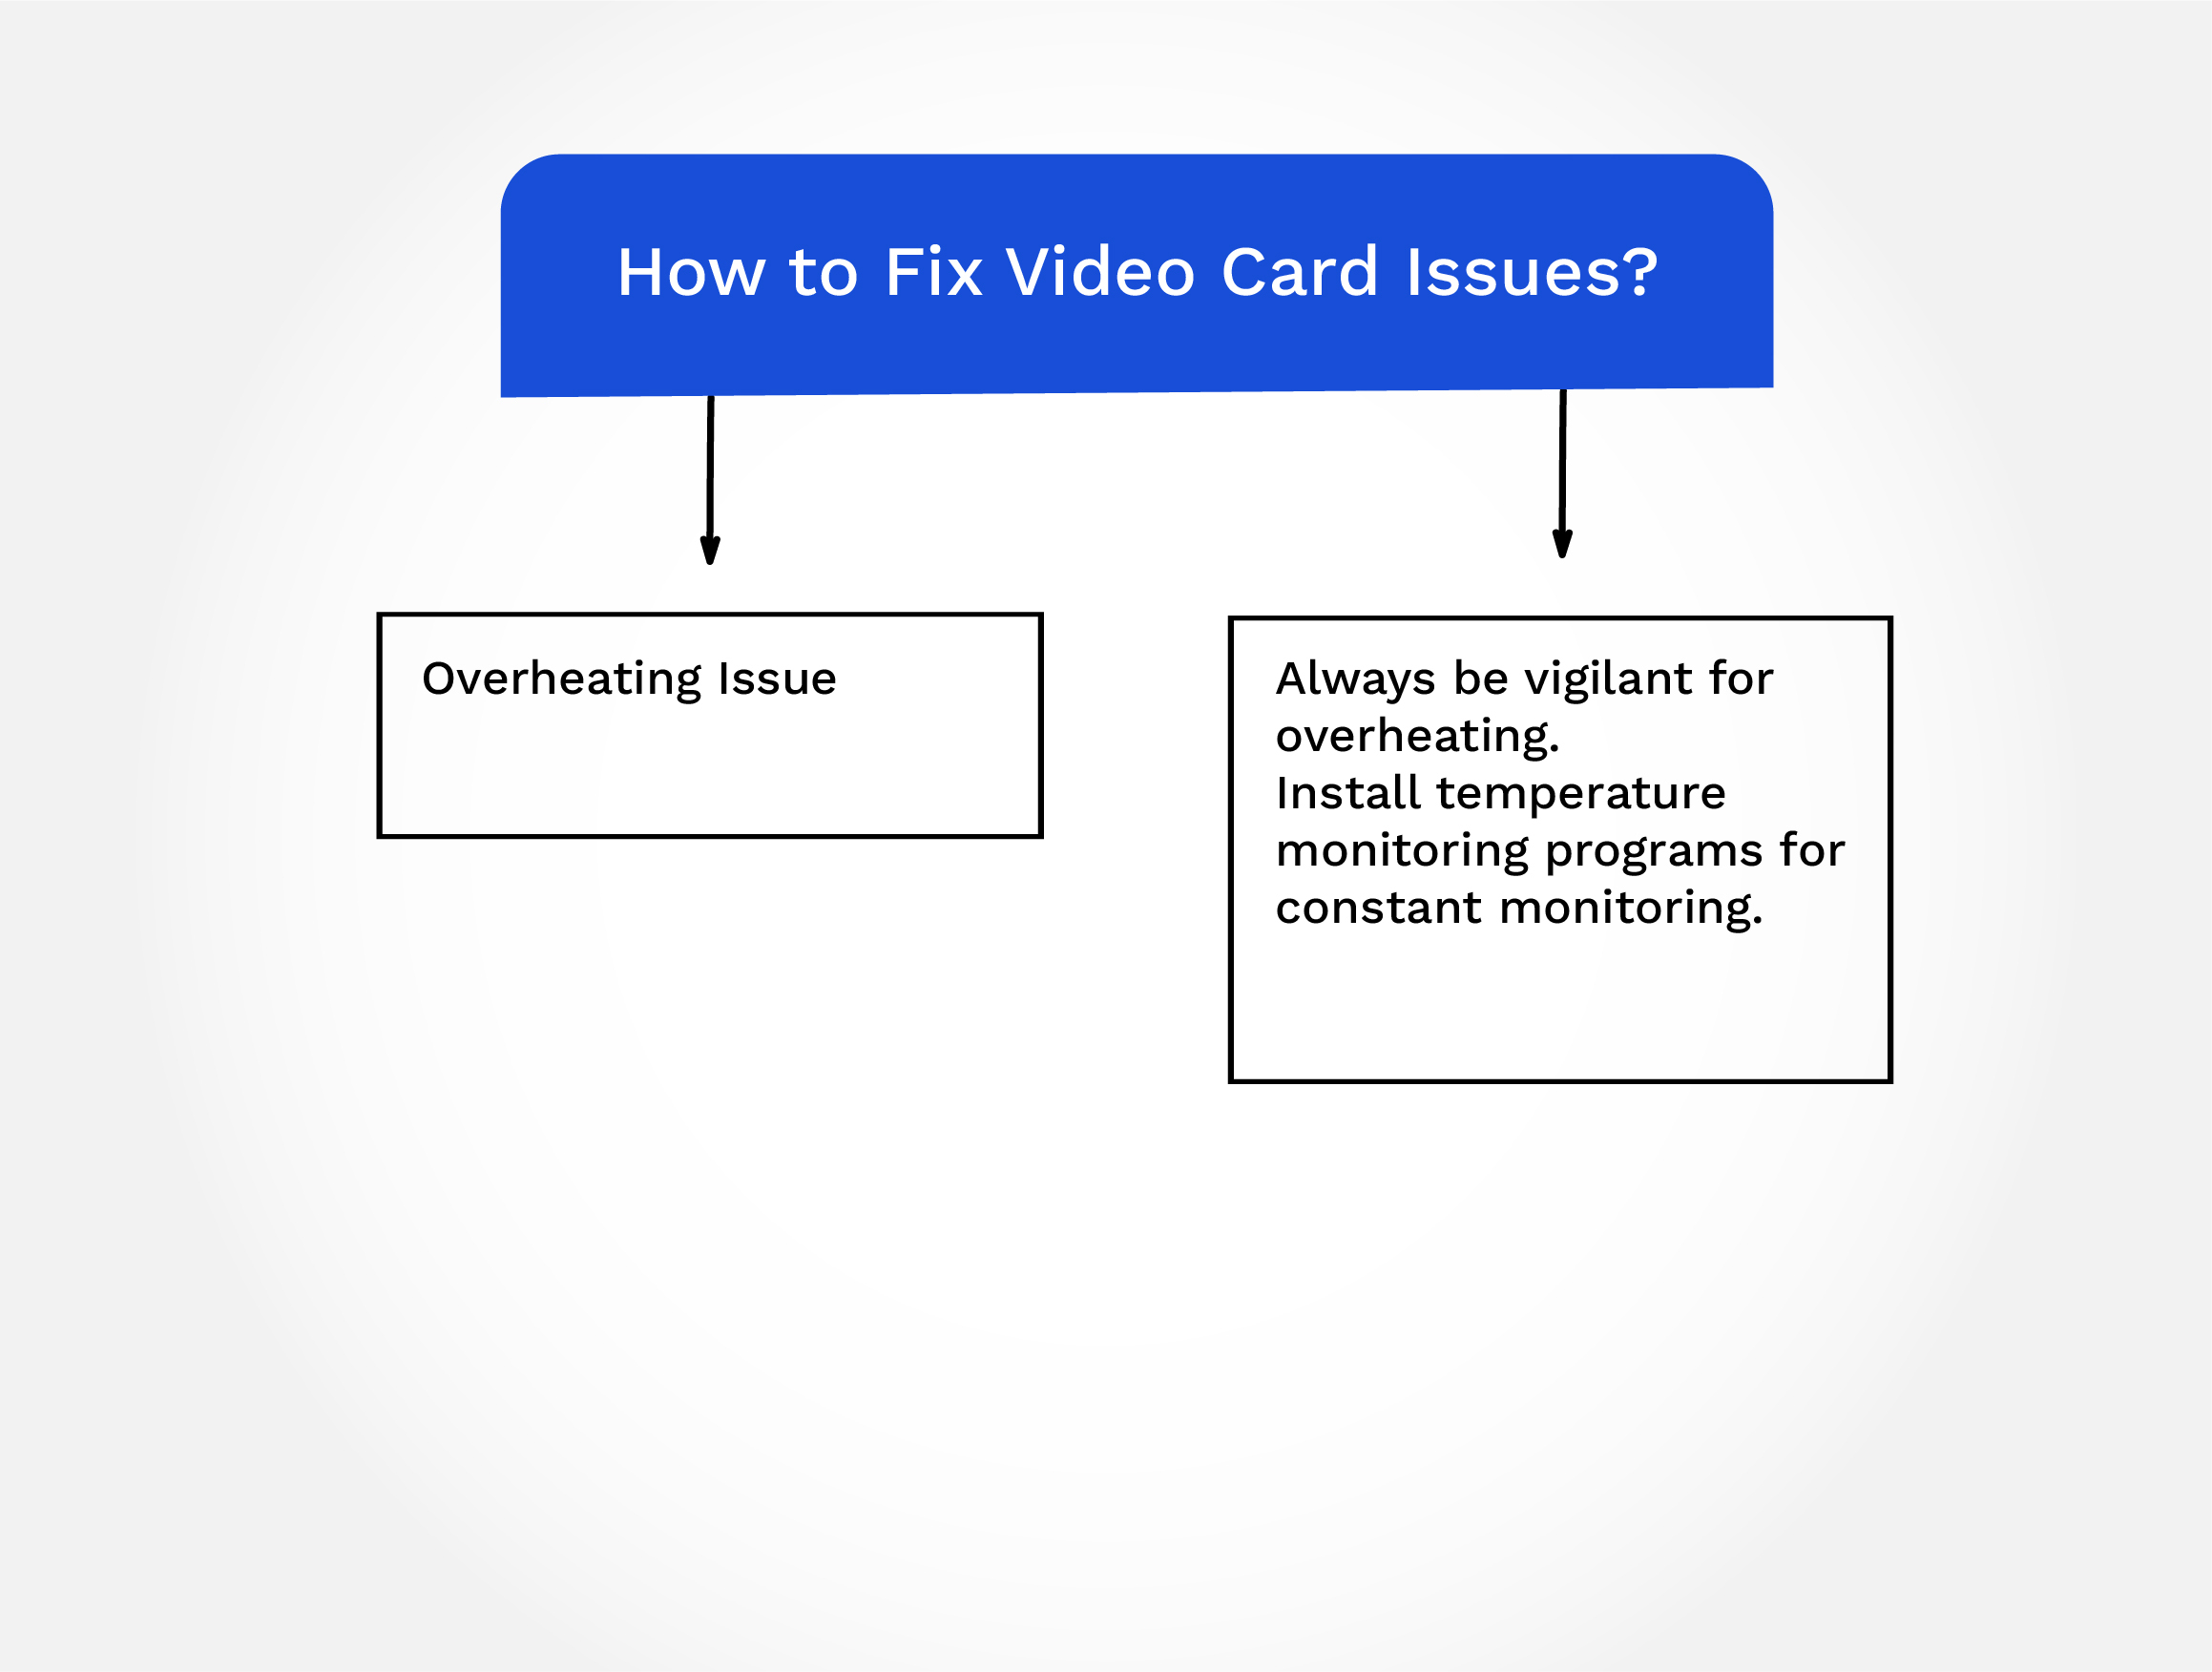 Fix Video Card Issues by Checking Overheating